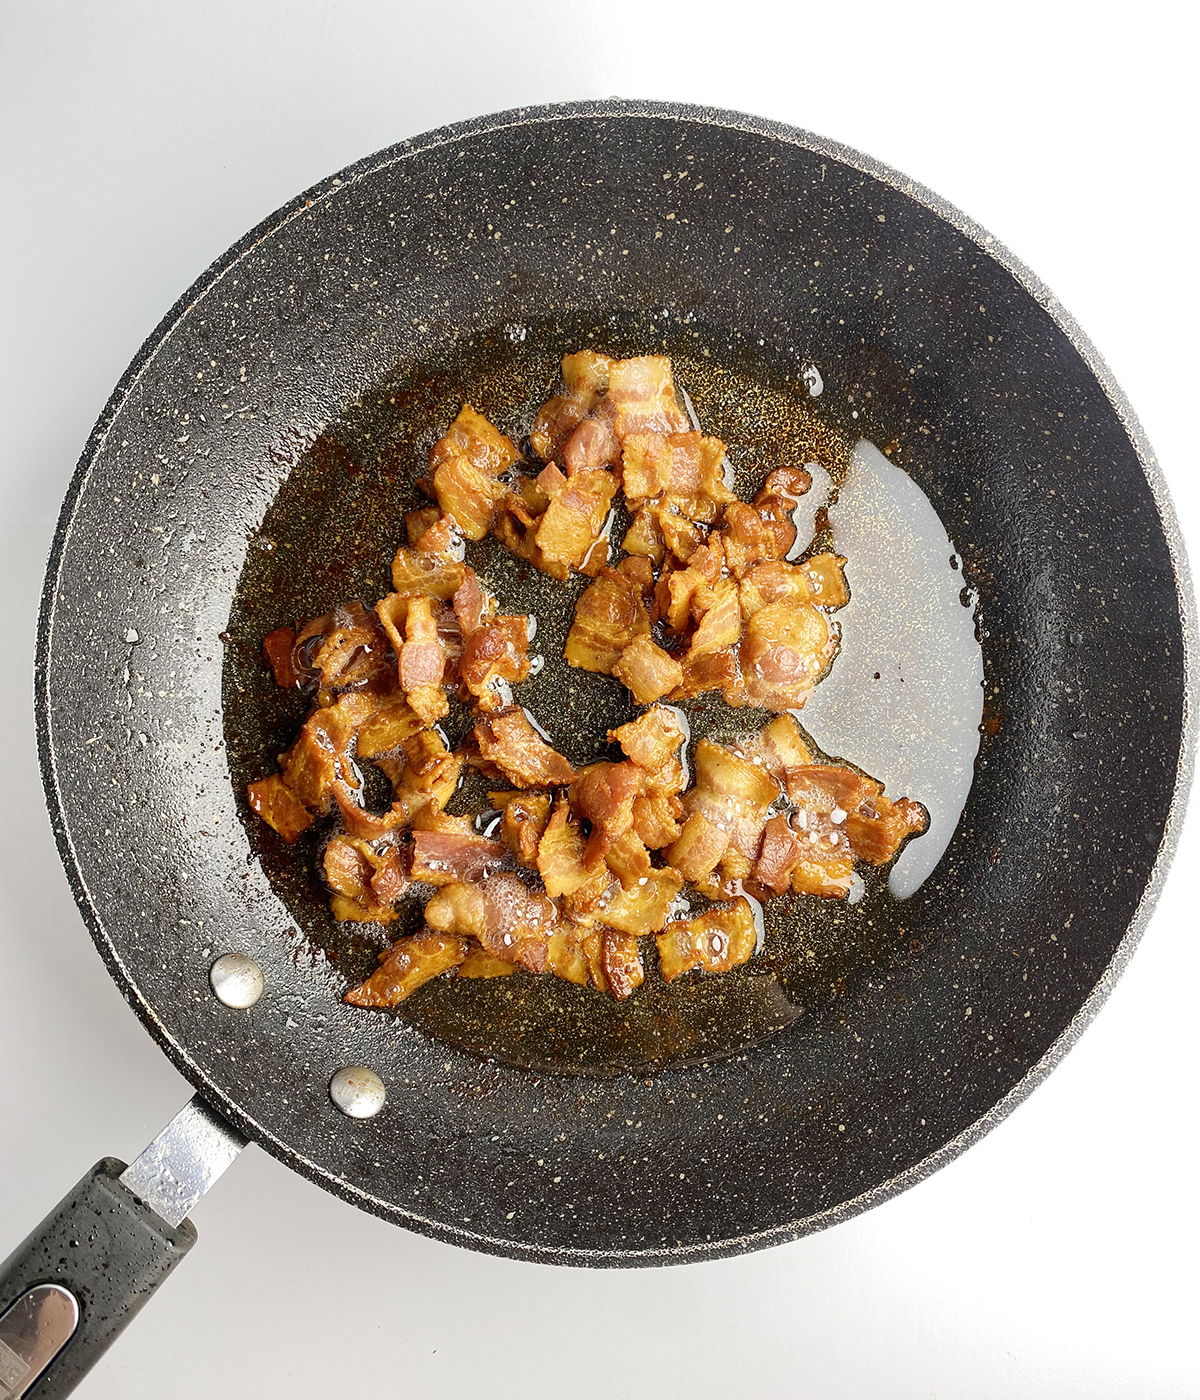 Chopped bacon cooking in a skillet.